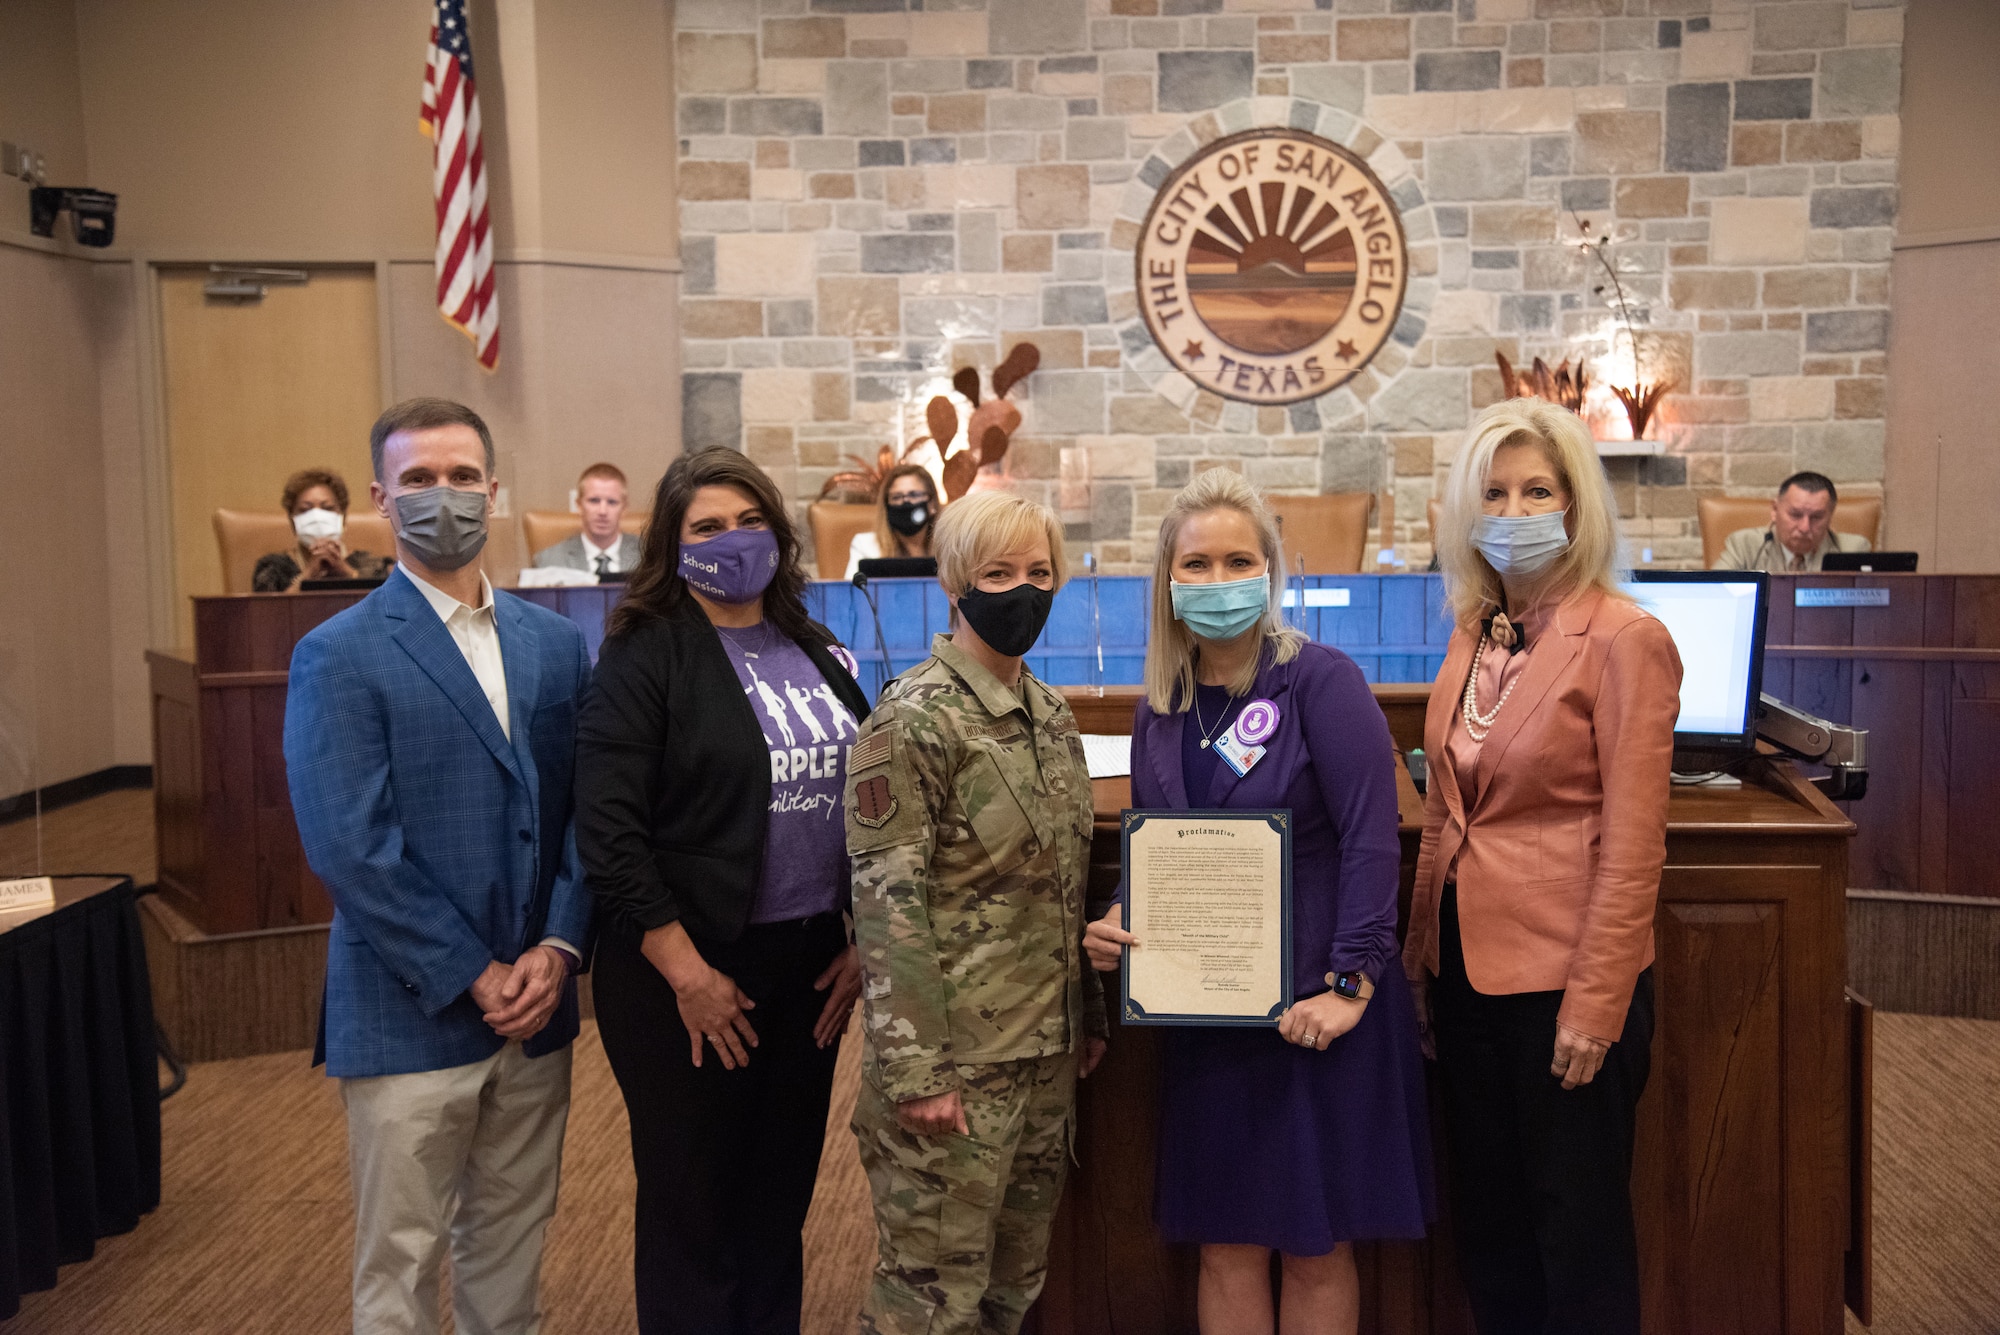 San Angelo Independent School District Superintendent, Dr. Carl Dethloff, Goodfellow Child and Youth Services School Liaison, Theresa Goodwin, Chief Master Sgt. Casy Boomershine, 17th Training Wing command chief, and SAISD Executive Director of Communications, Whitney Wood, pose holding a proclamation of recognition for the Month of the Military Child, with Mayor of San Angelo, Brenda Gunter, during a monthly City Council meeting, April 6, 2021, at the McNease Convention Center, San Angelo, Texas. Gunter declared a city-wide recognition of April as the Month of the Military Child in thanks to military children and their families. (U.S. Air Force photo by Staff Sgt. Tyrell Hall)